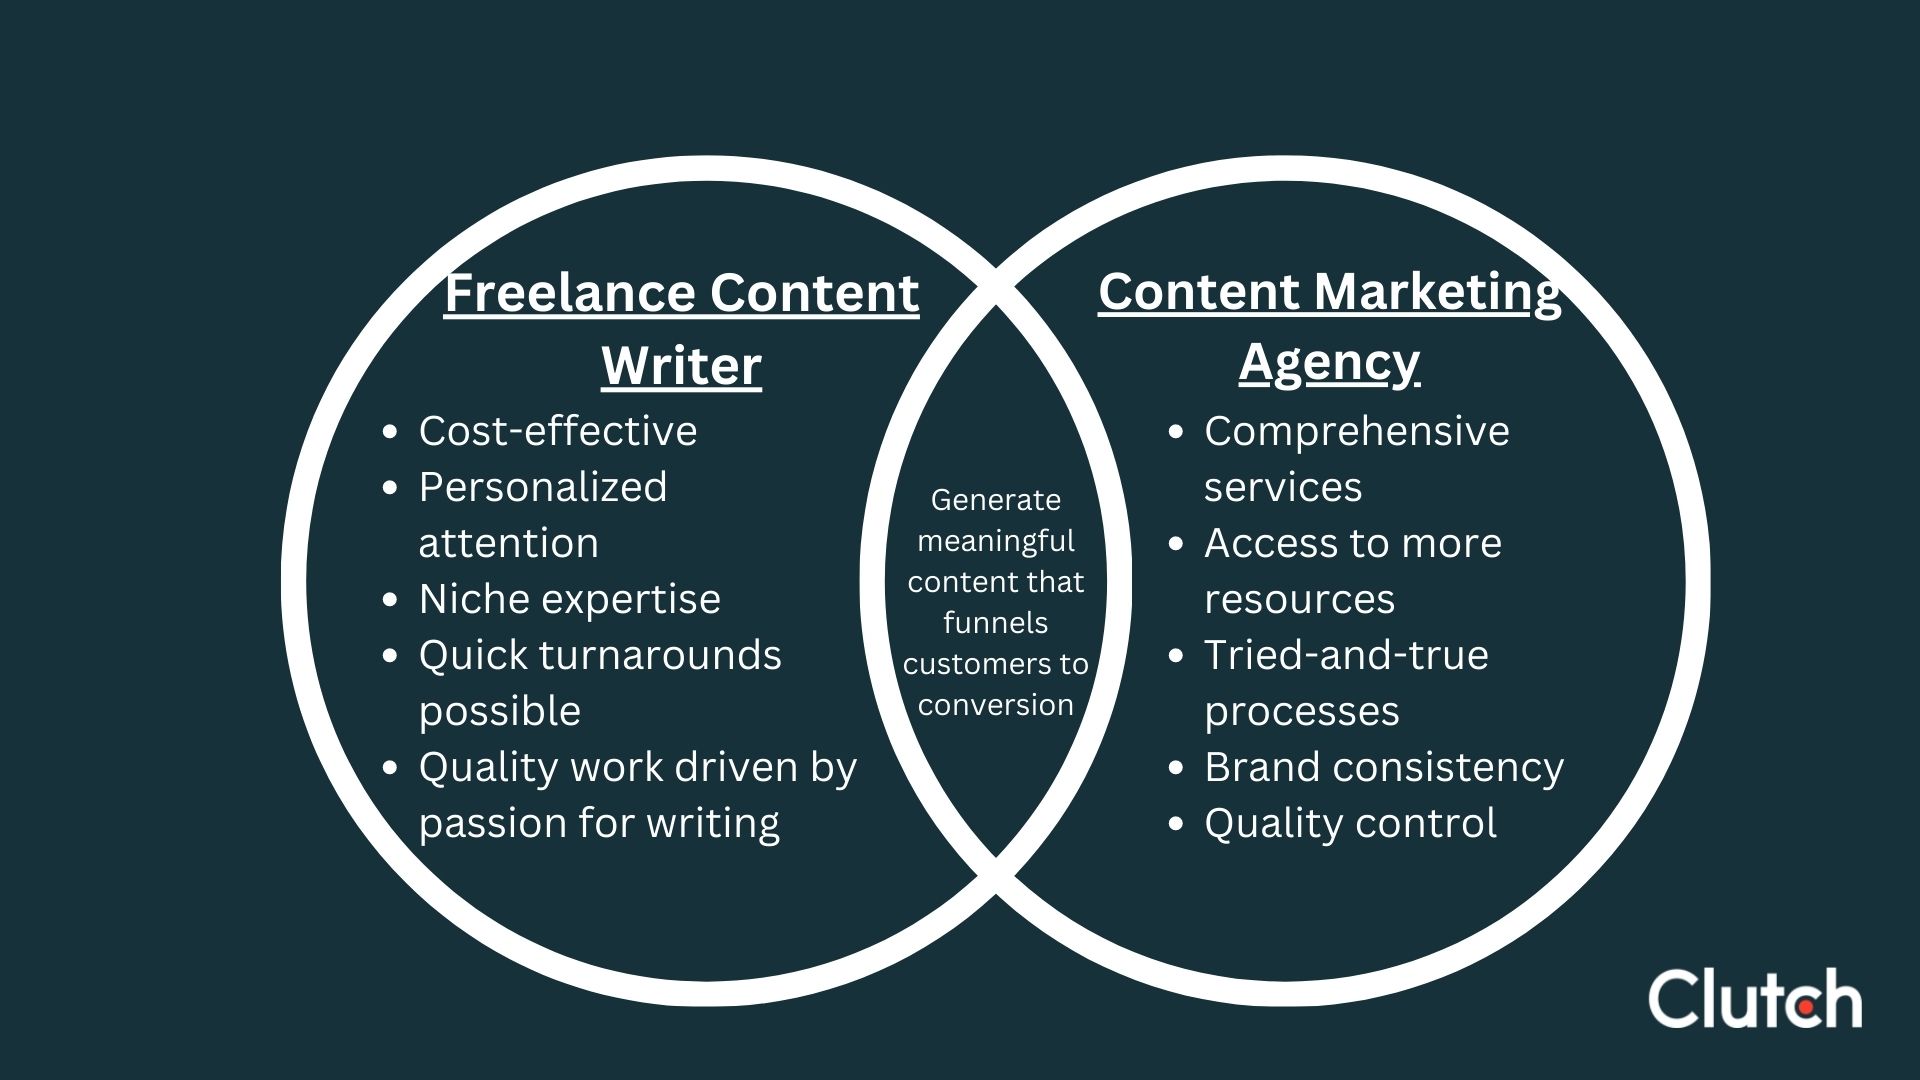 freelance content writer benefits compared to content agency benefits